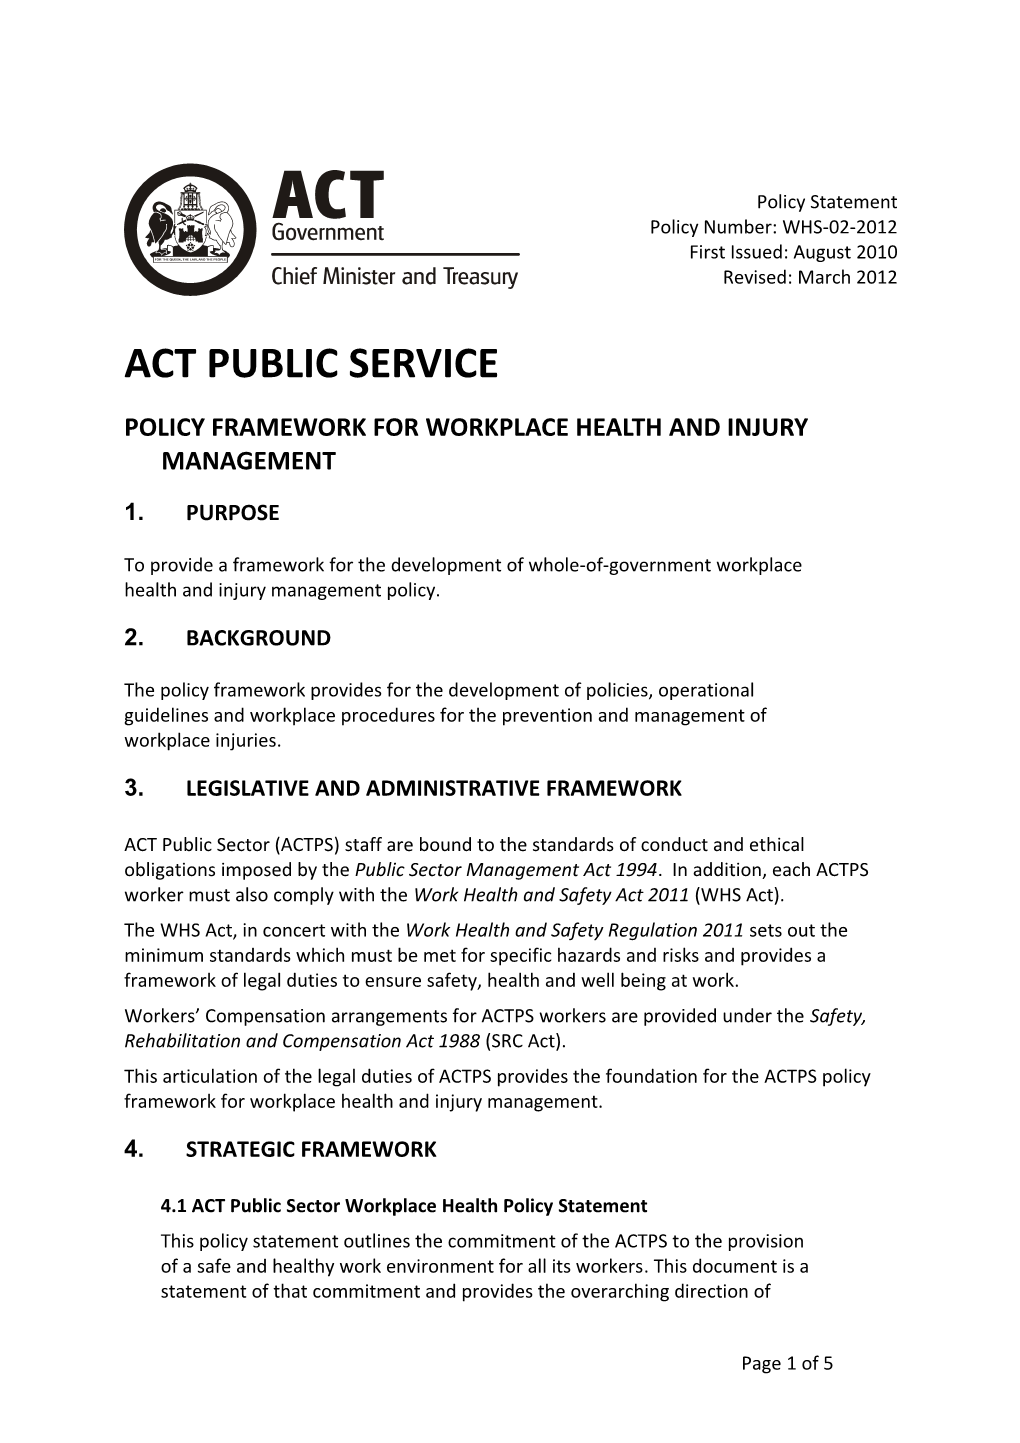 Policy Framework for Workplace Health and Injury Management